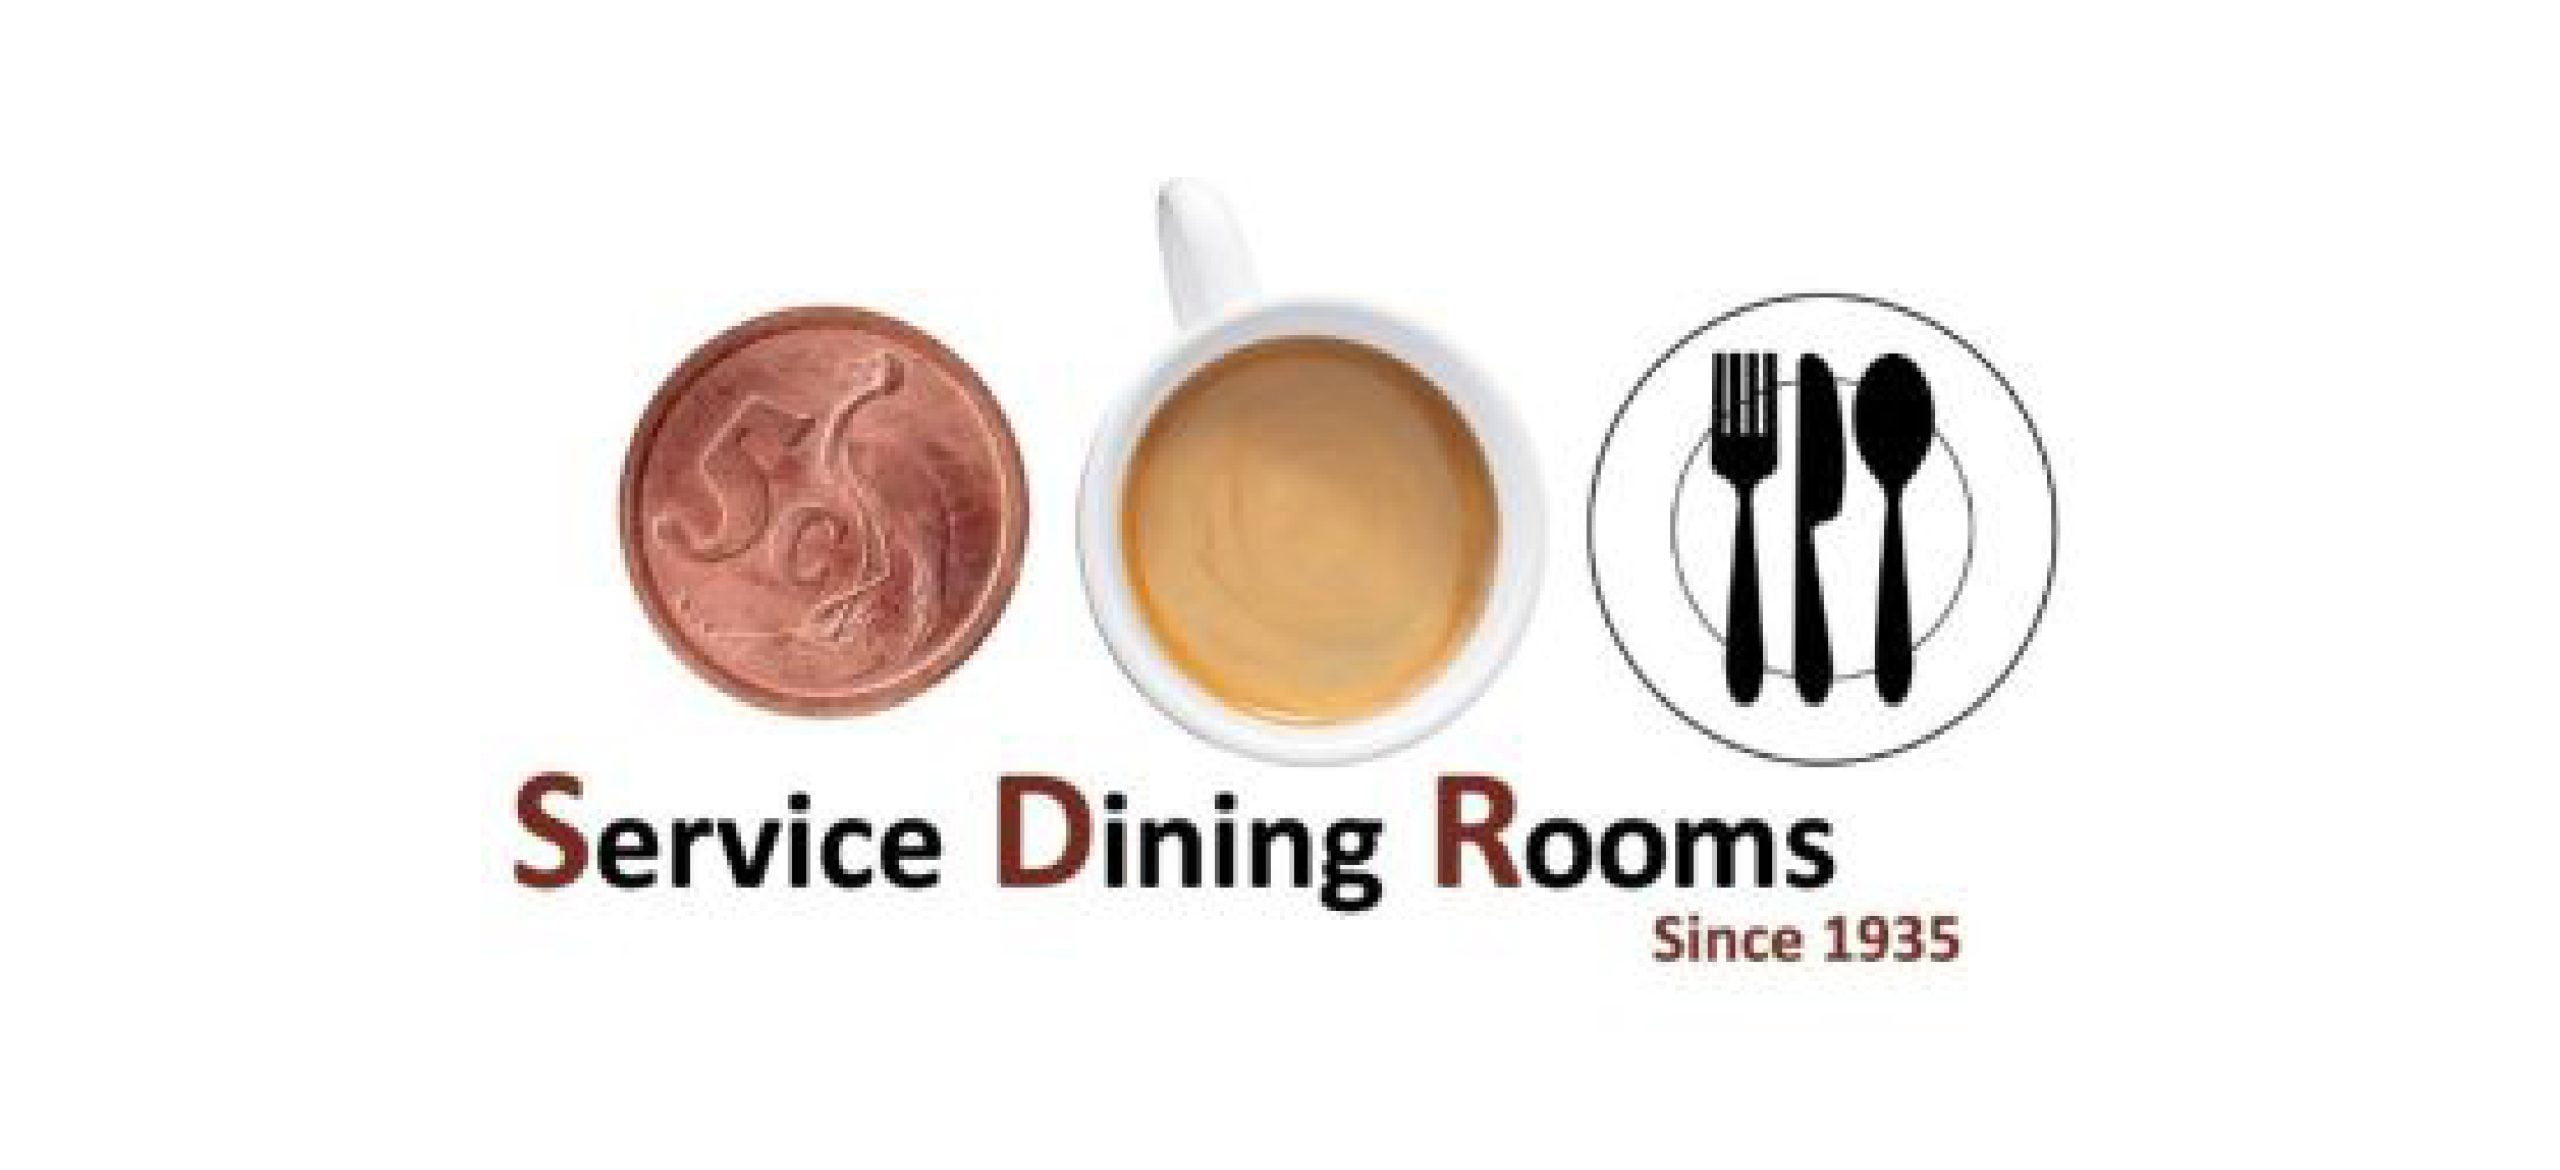 The Service Dining Rooms